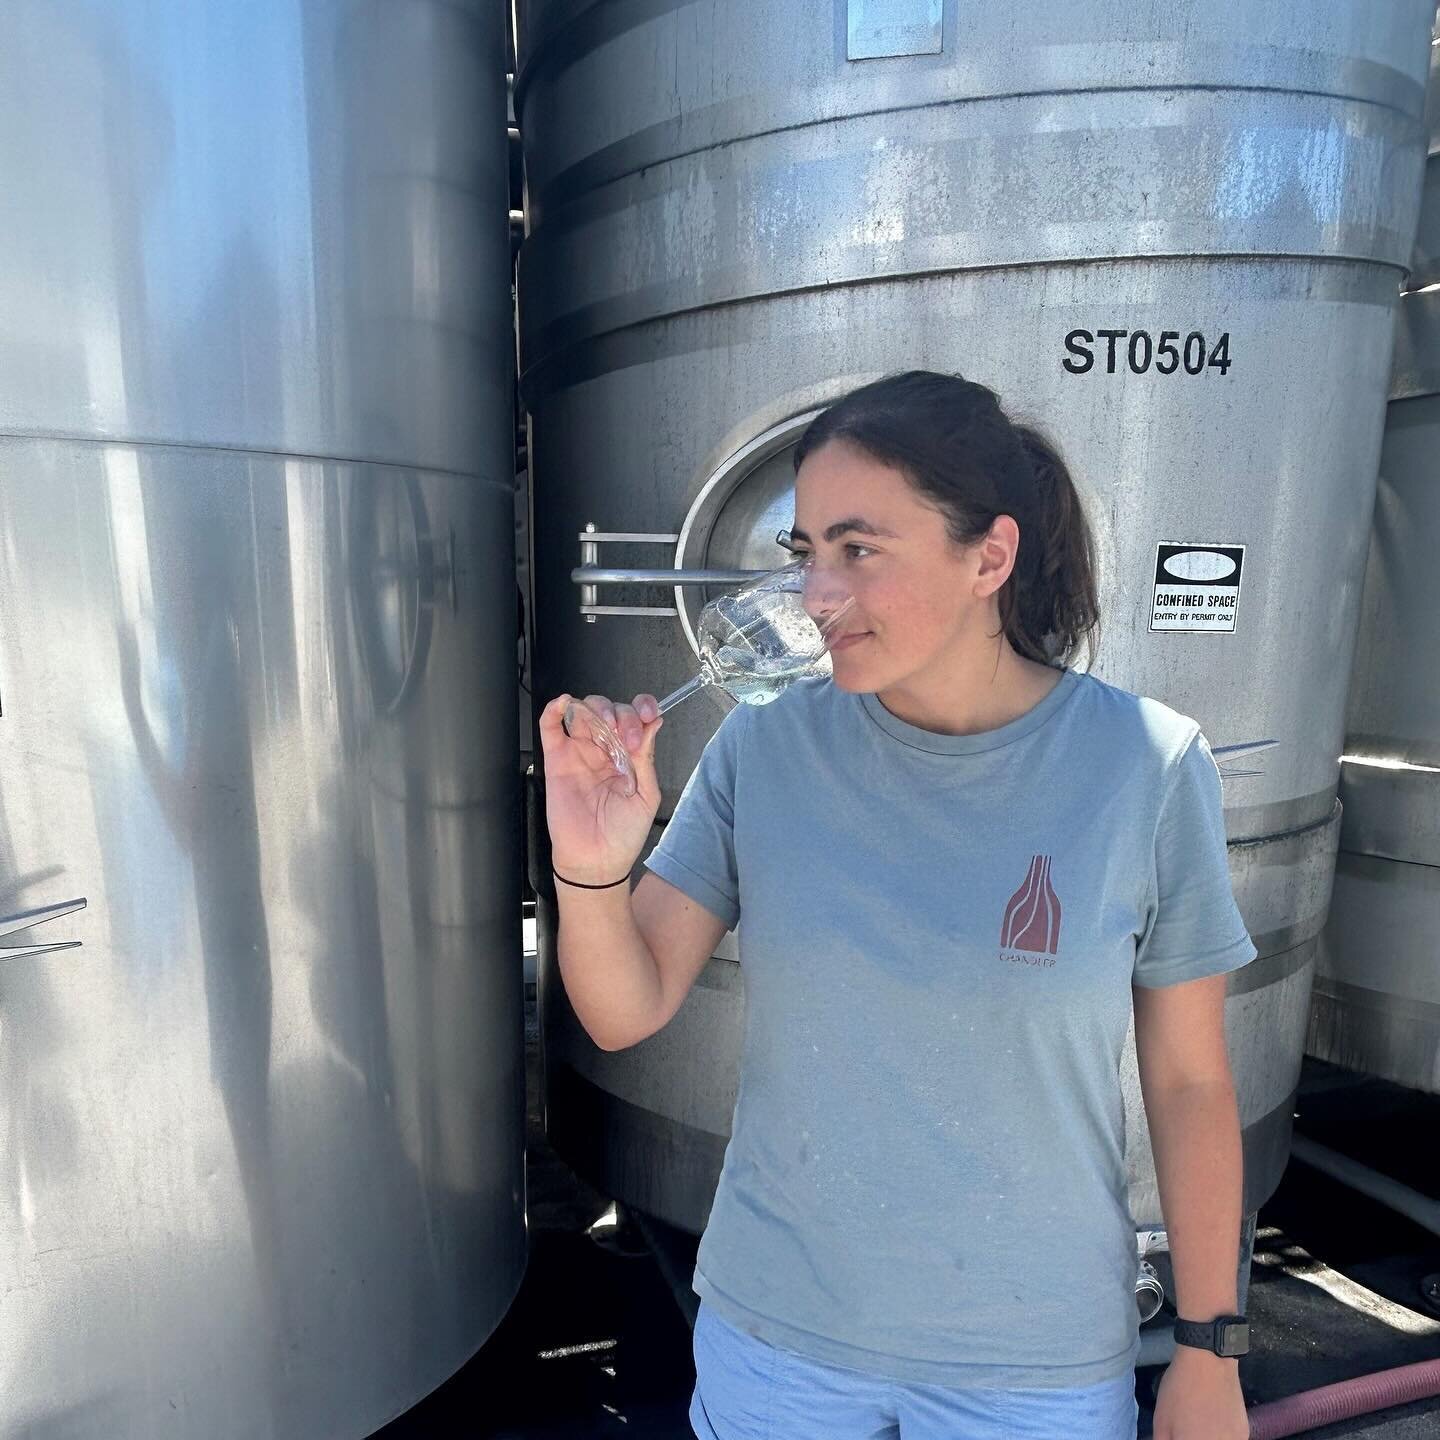 Between her busy shifts we caught up with Henri, one of our brilliant lab technicians and asked her afew questions about harvest! ⁠⁠
⁠
What does a typical day involve during harvest?⁠
⁠
&ldquo;I would say there is no typical day during harvest. Based